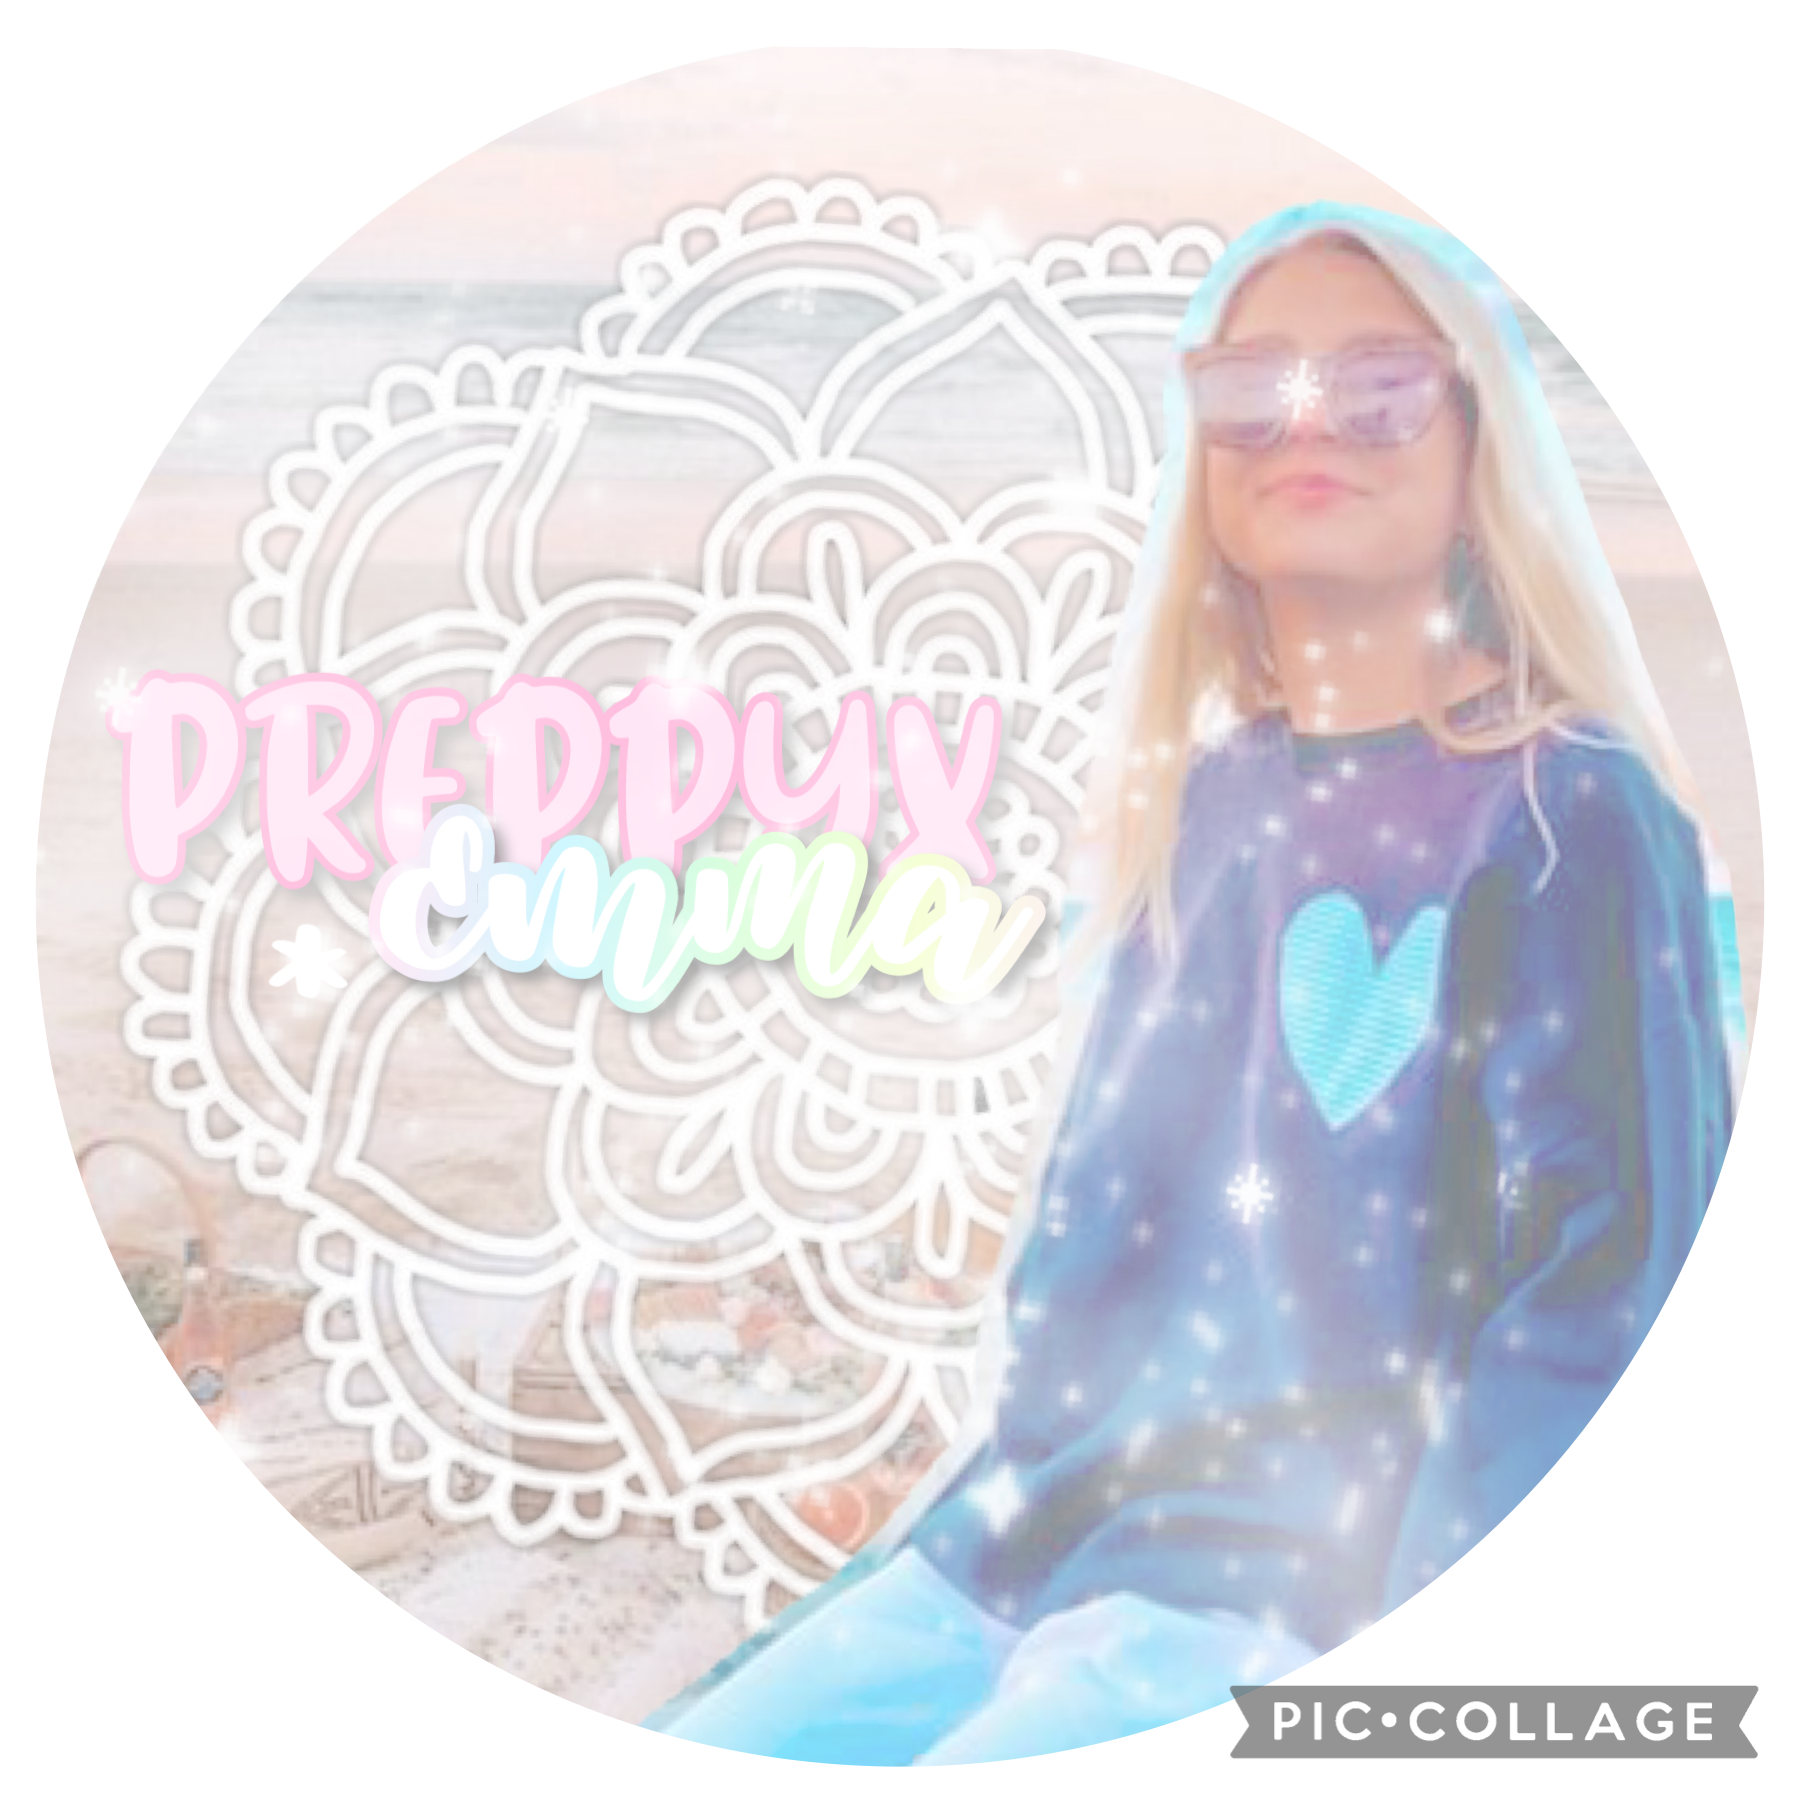 Icon for @preppyxemma! Plz give credit if used